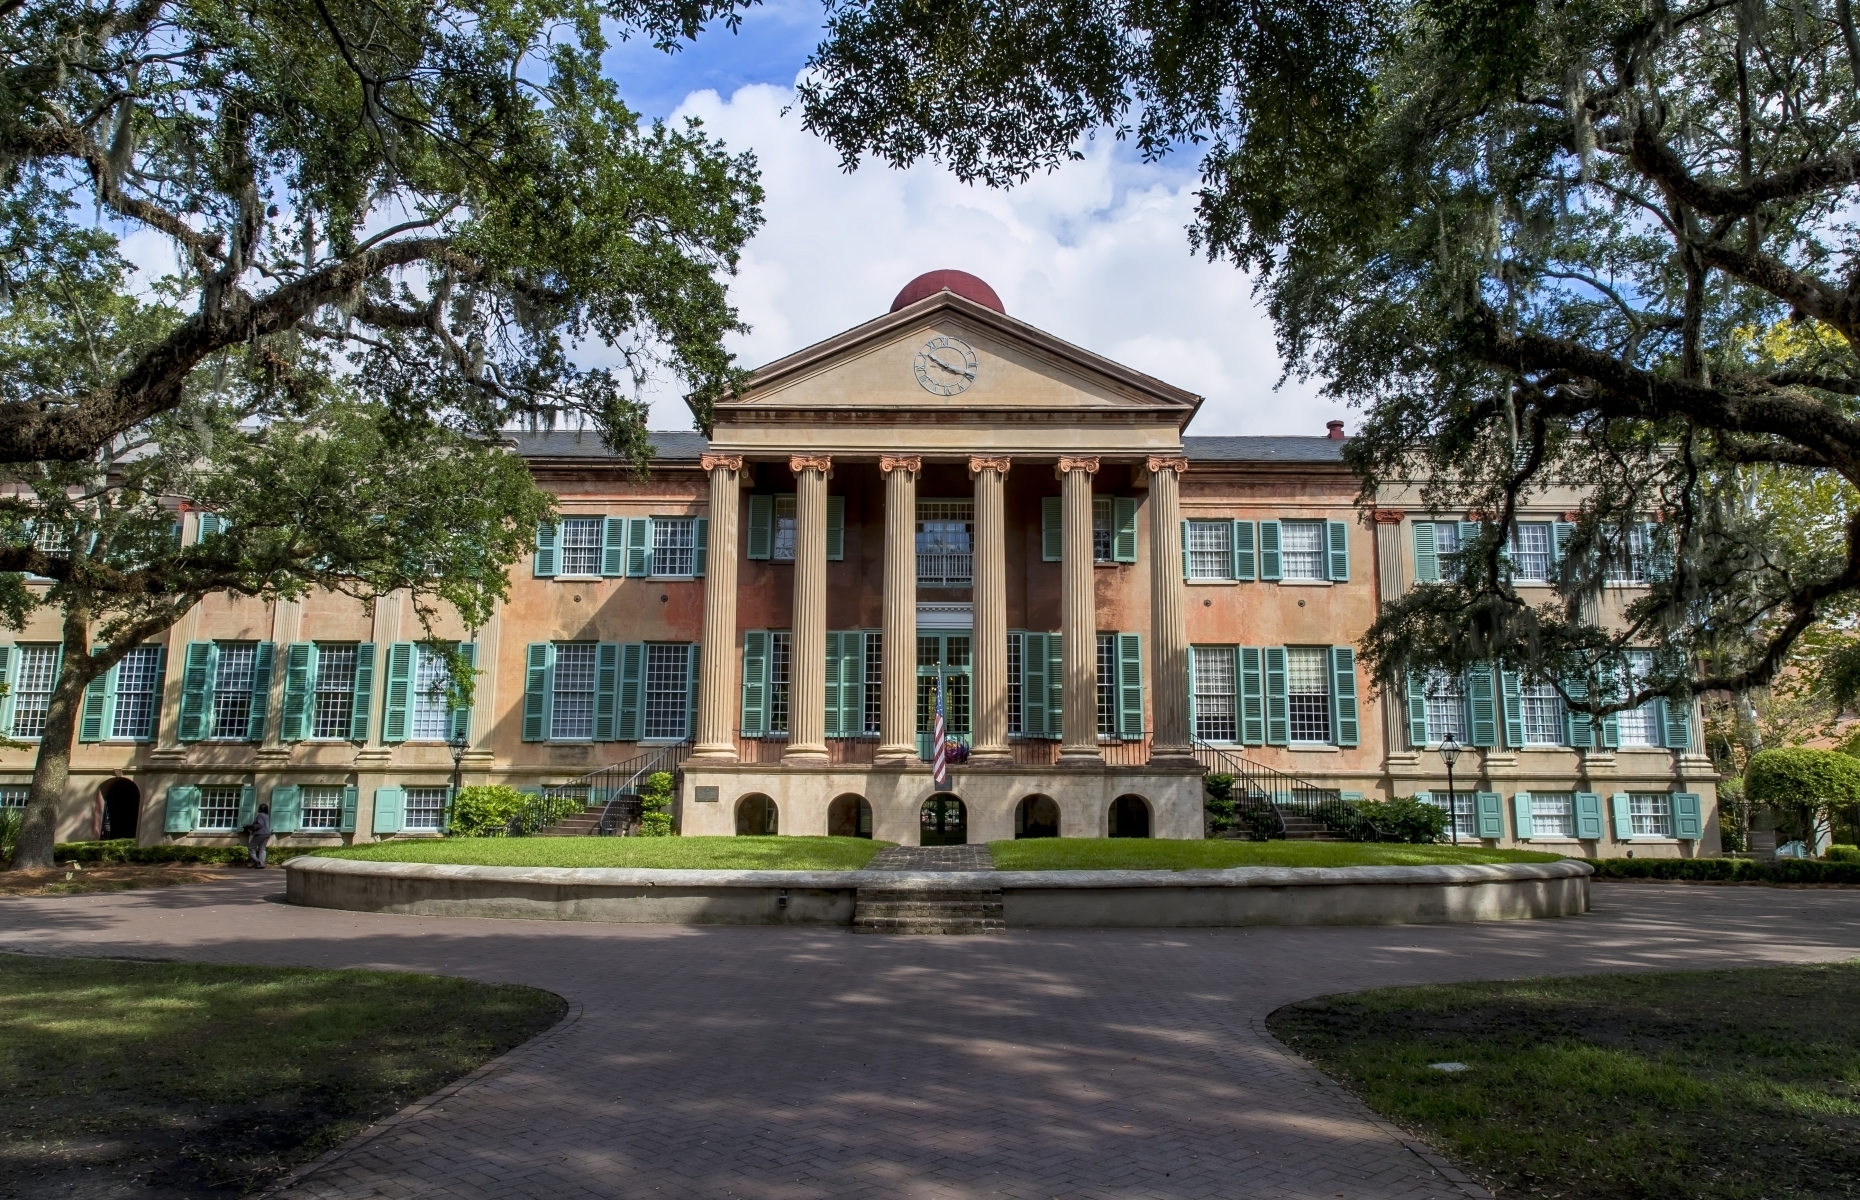 <p>Just like the city of Charleston itself, this <a href="http://cofc.edu/" rel="noreferrer noopener">college campus</a> is full of oak-tree-lined courtyards and grand old buildings (such as Randolph Hall, pictured). This romantic setting appears in scenes from the movies <em>The Notebook</em> and <em>Dear John</em>.</p>